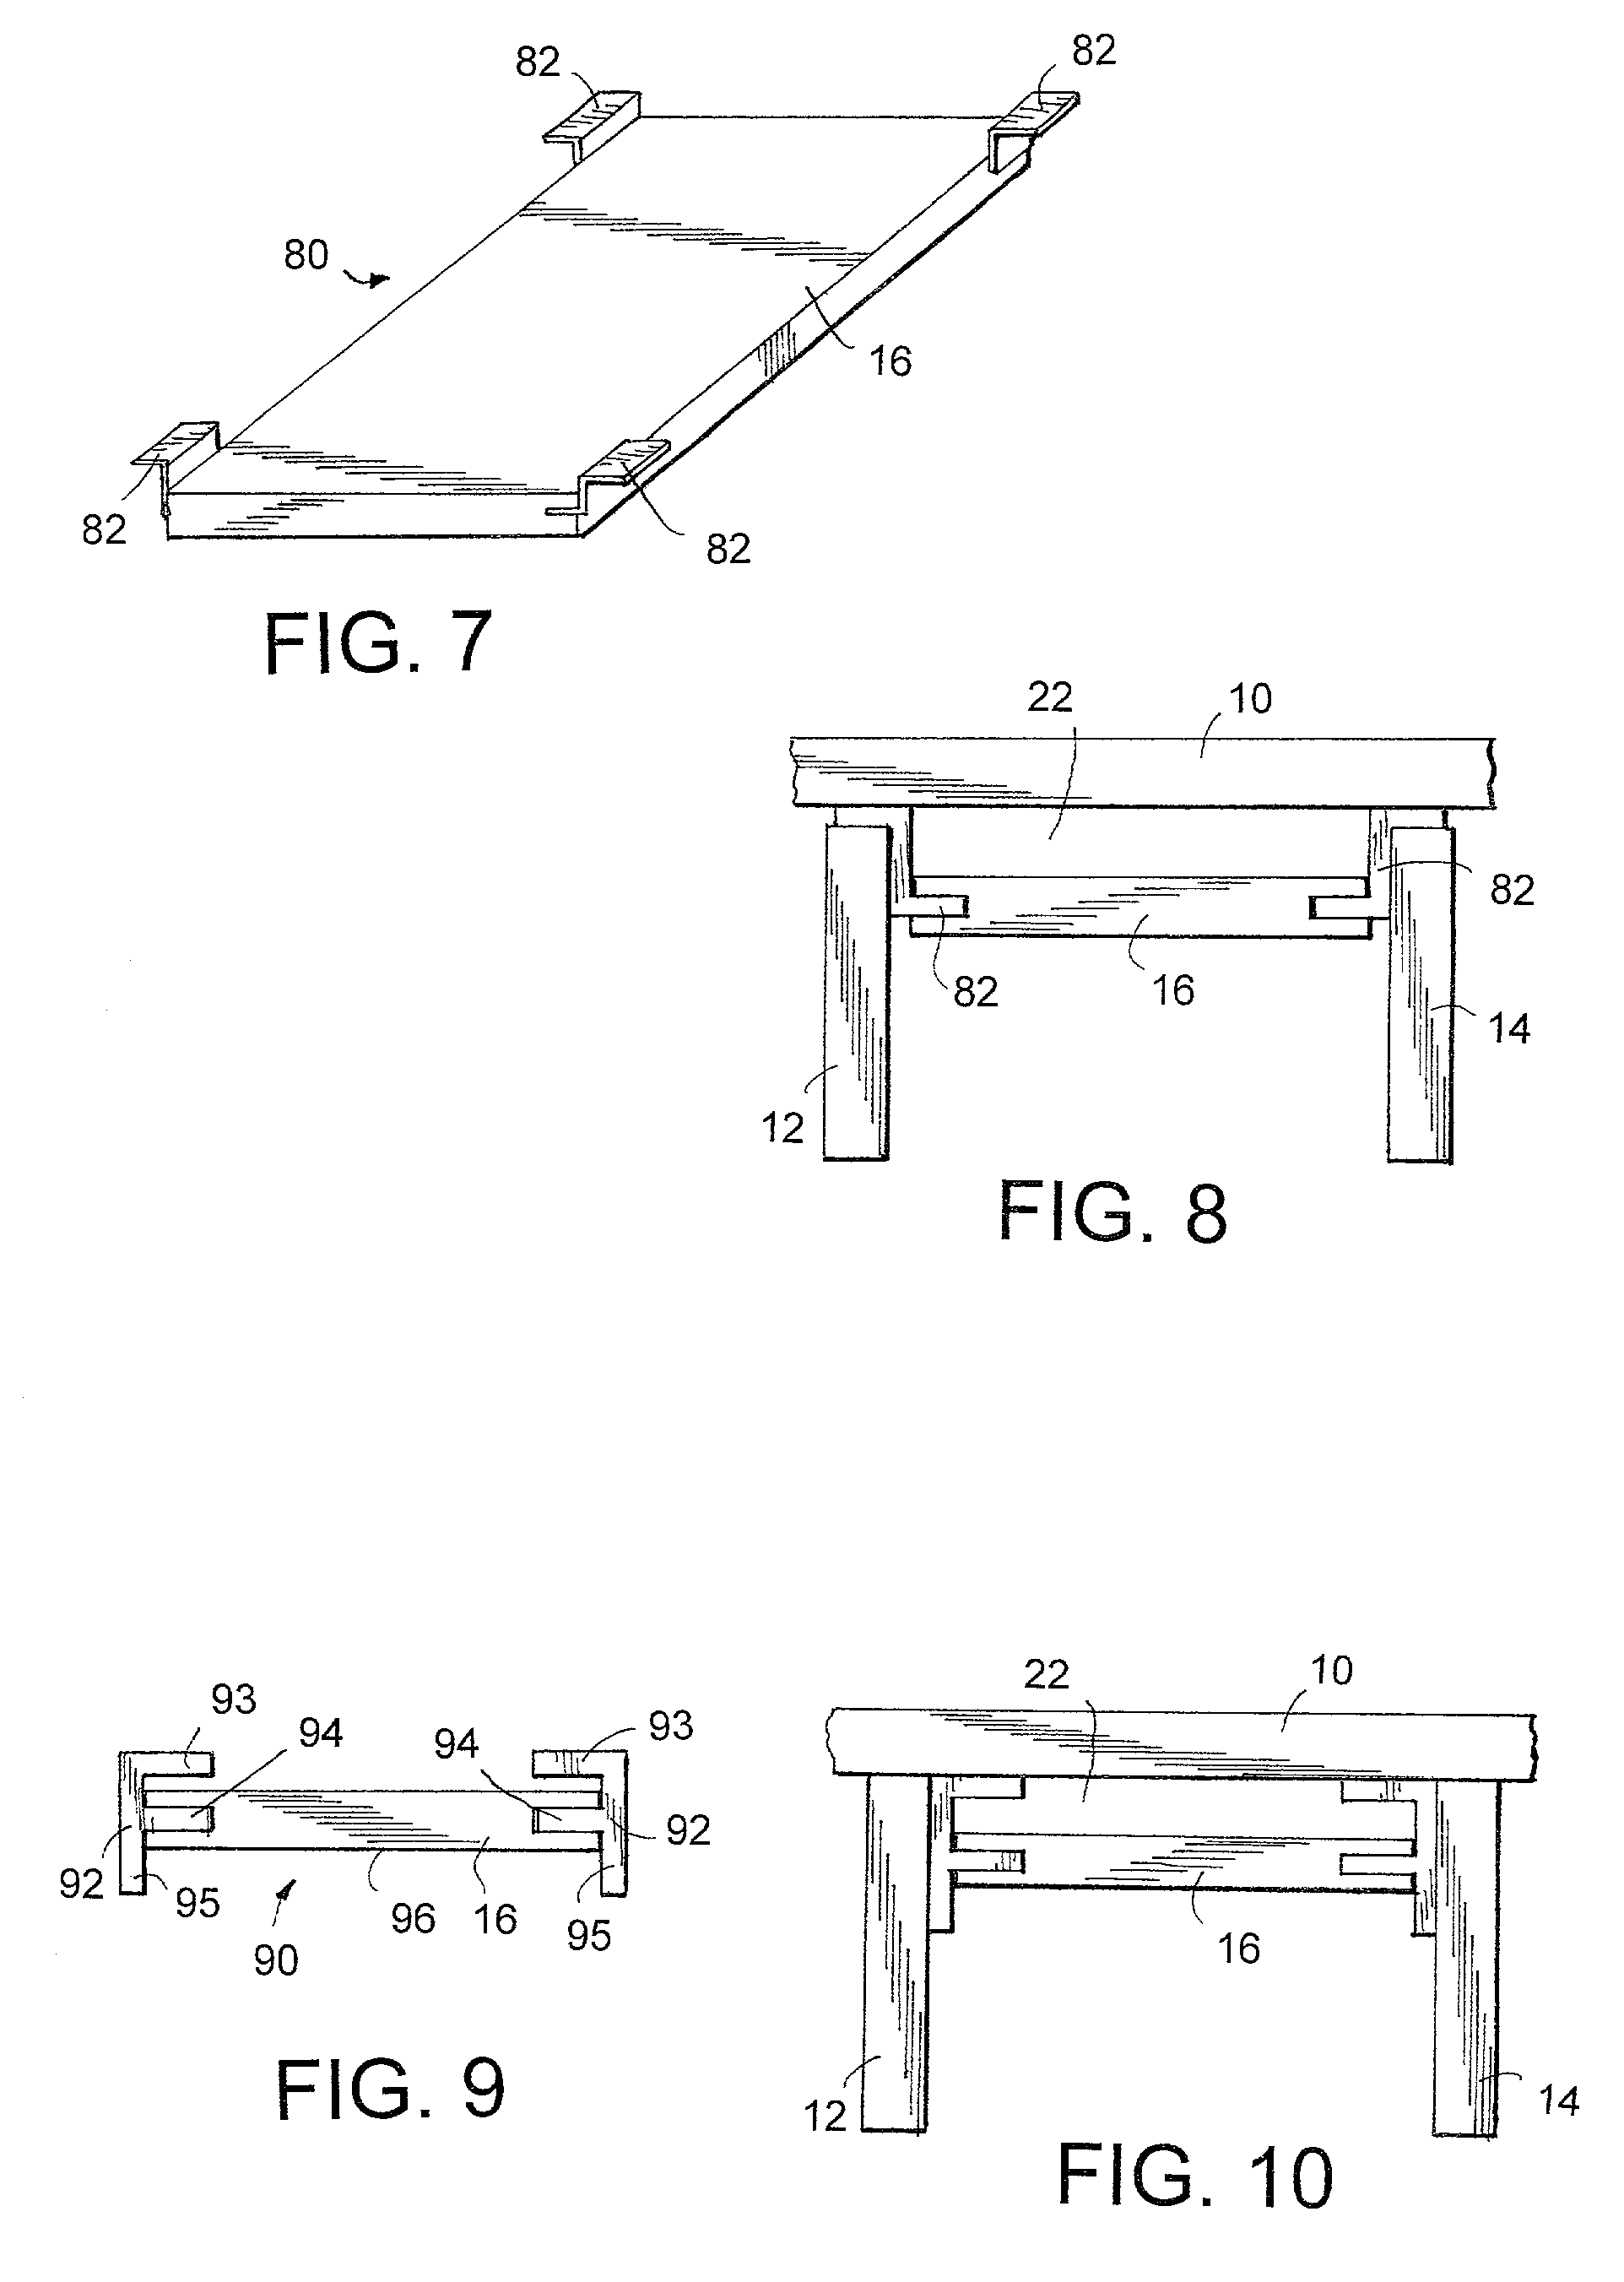 Process and apparatus for insulating building roof